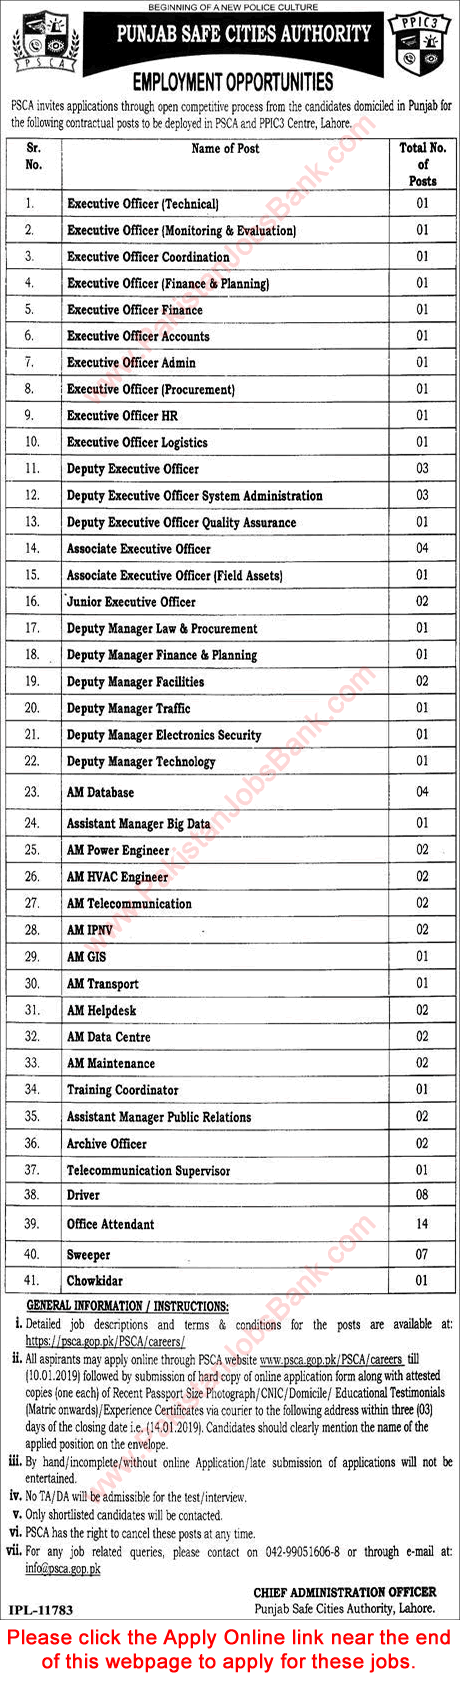 Punjab Safe Cities Authority Jobs December 2018 PSCA PPIC3 Centre Lahore Apply Online Latest